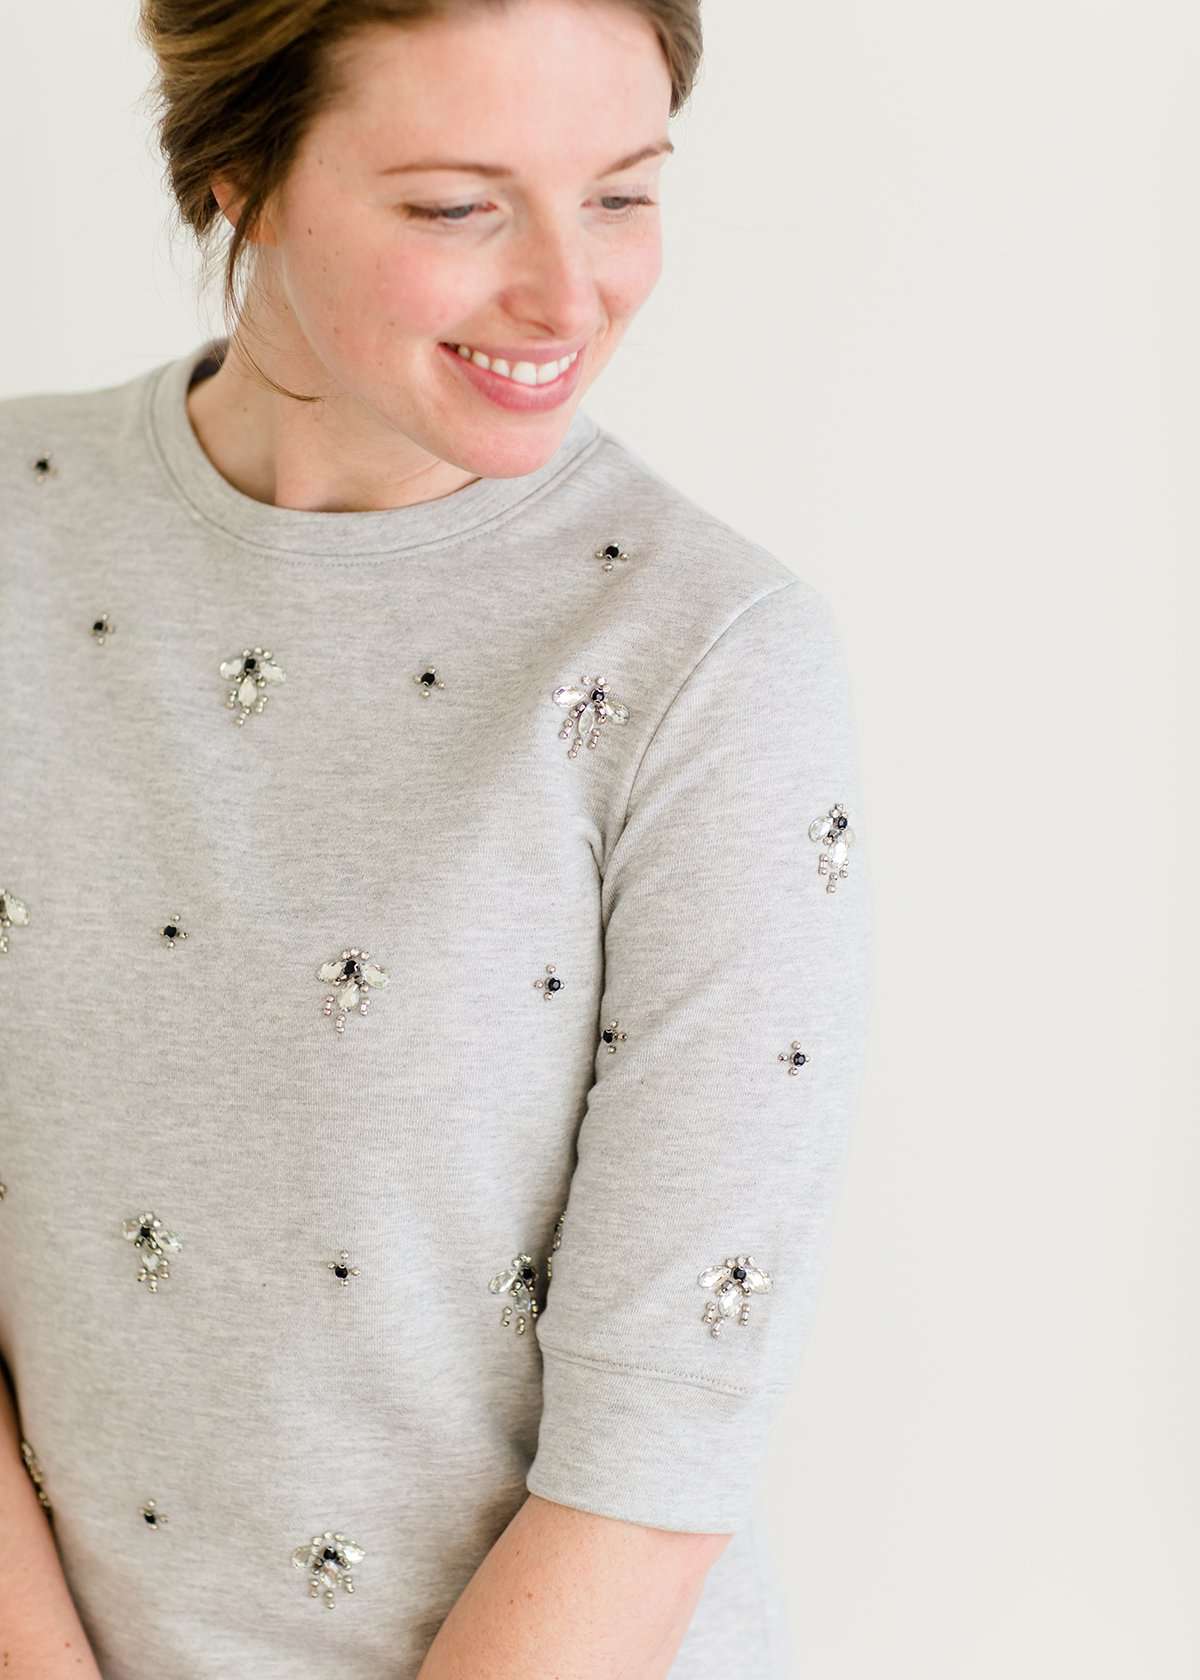 Woman wearing a gray crew neck sweatshirt that is half sleeves and has jewel designs on it.